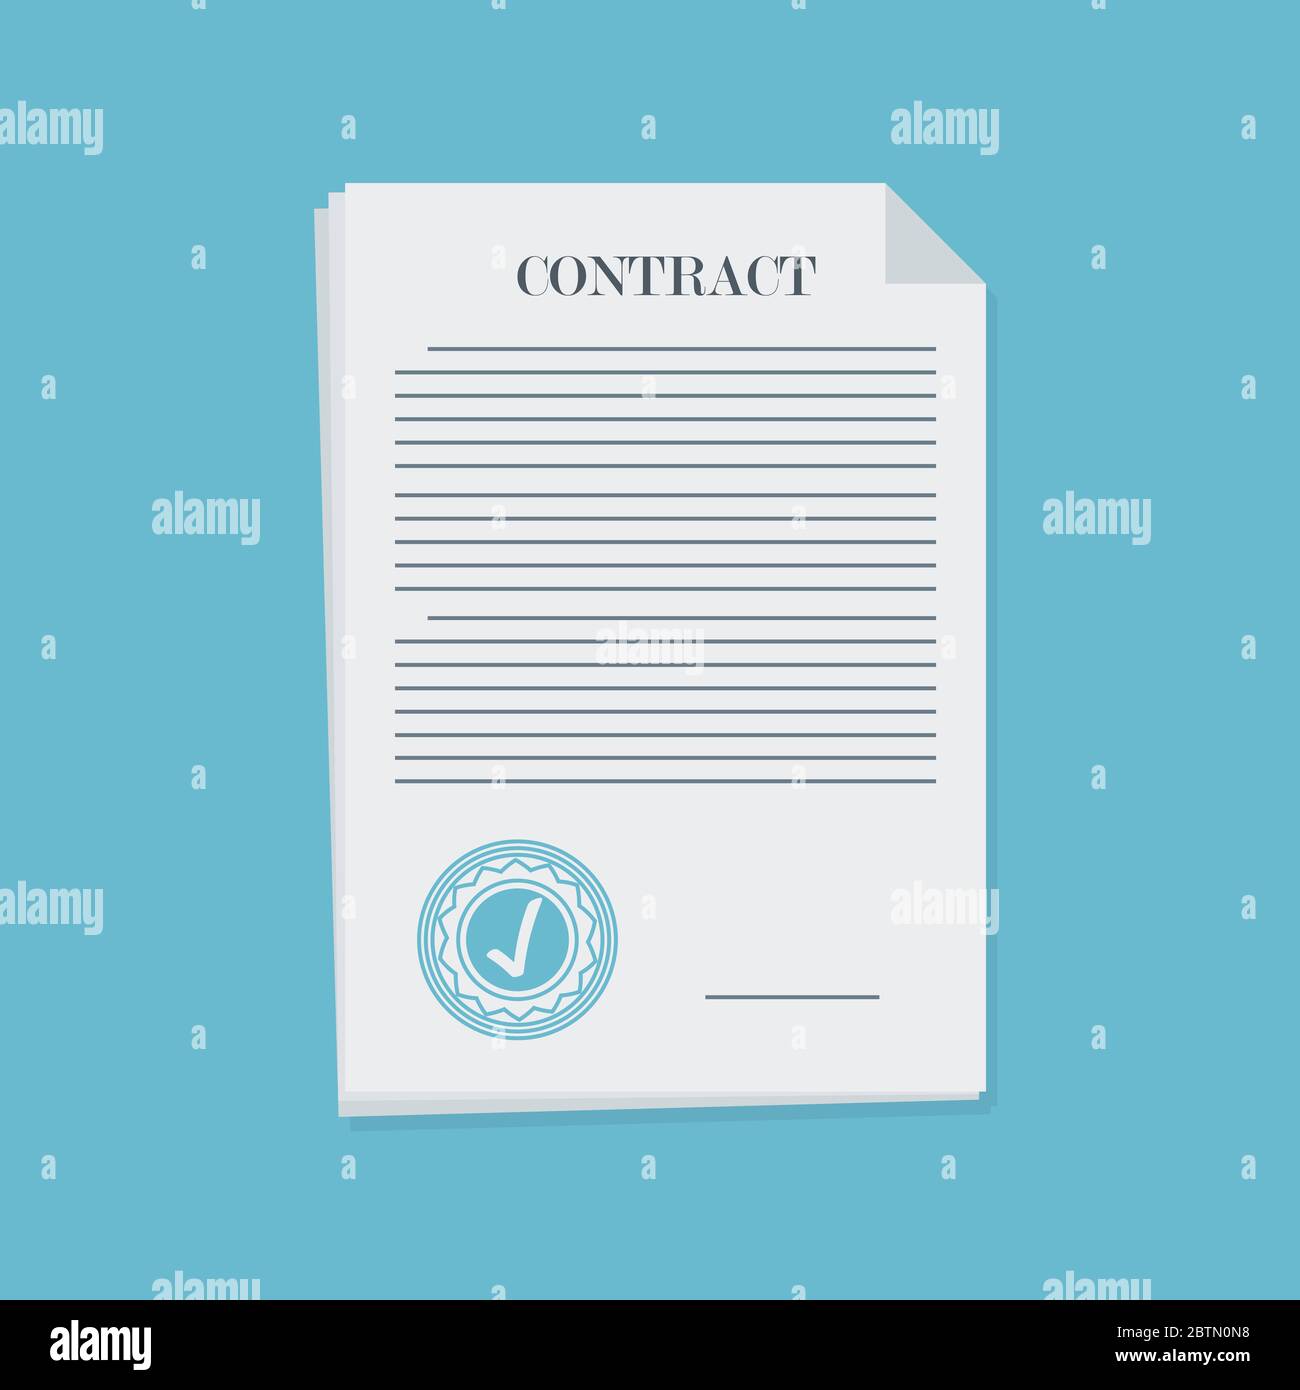 Contract in flat style, business concept, vector illustration Stock Vector